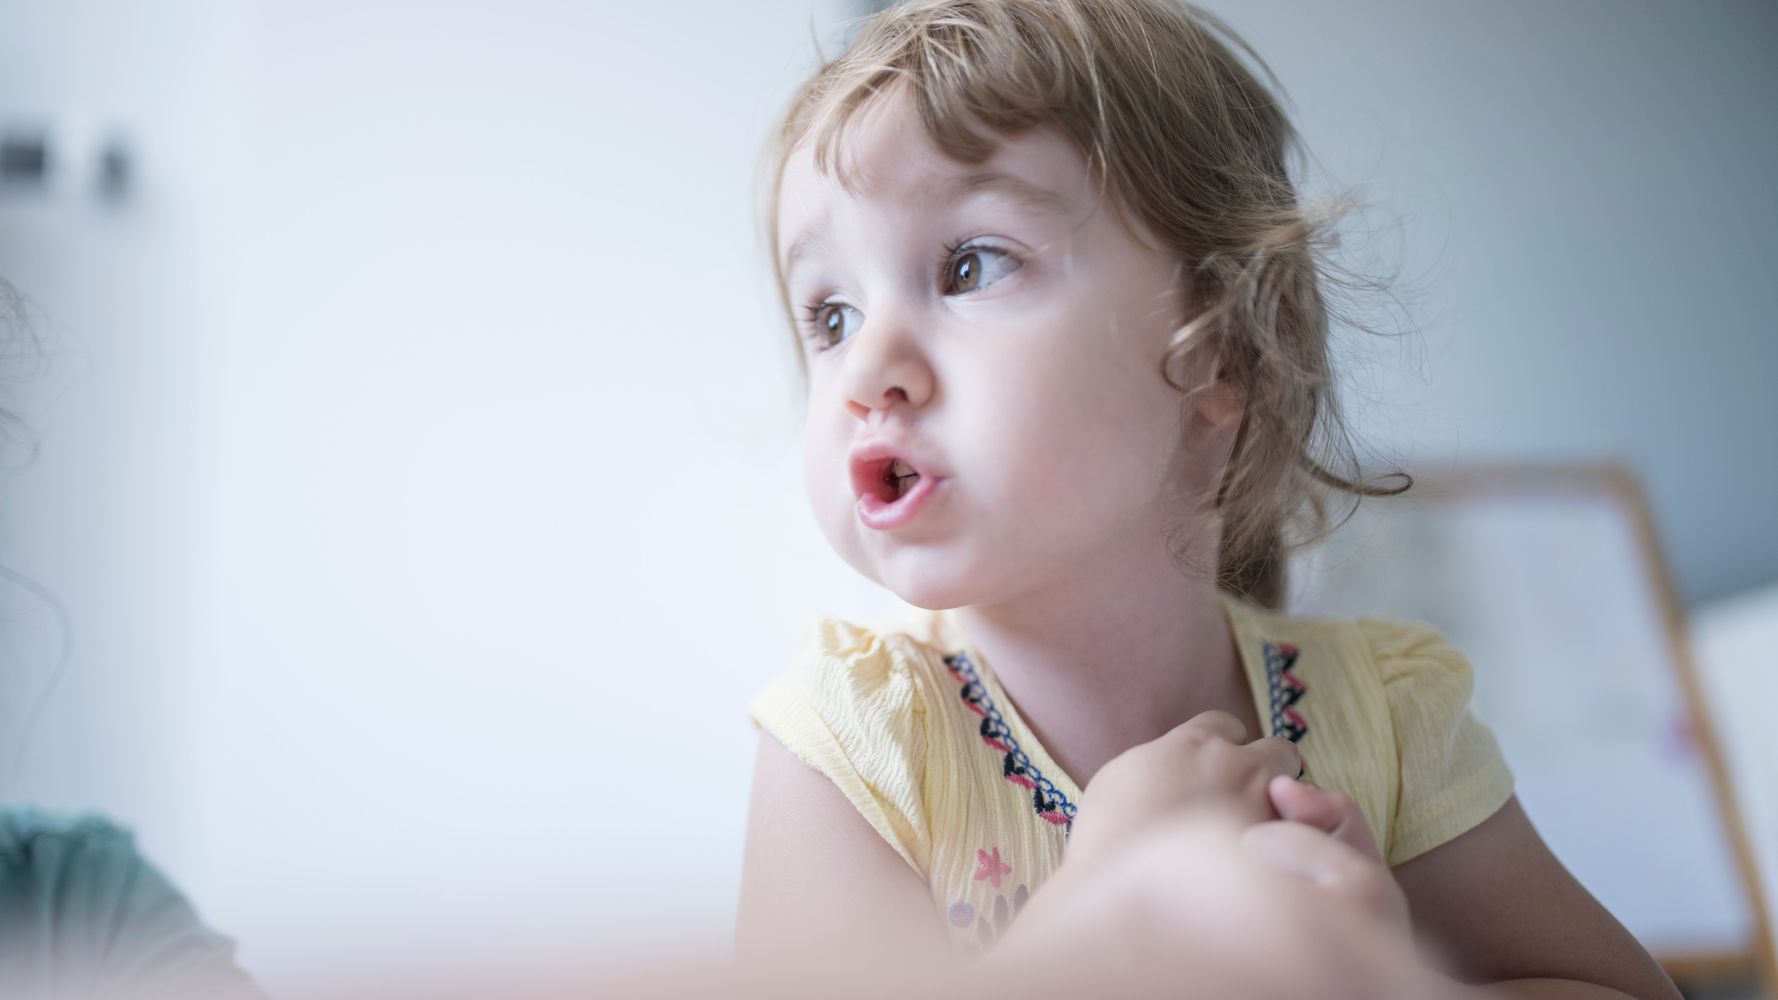 How To Respectfully Get Your Kid To Stop Talking So Much